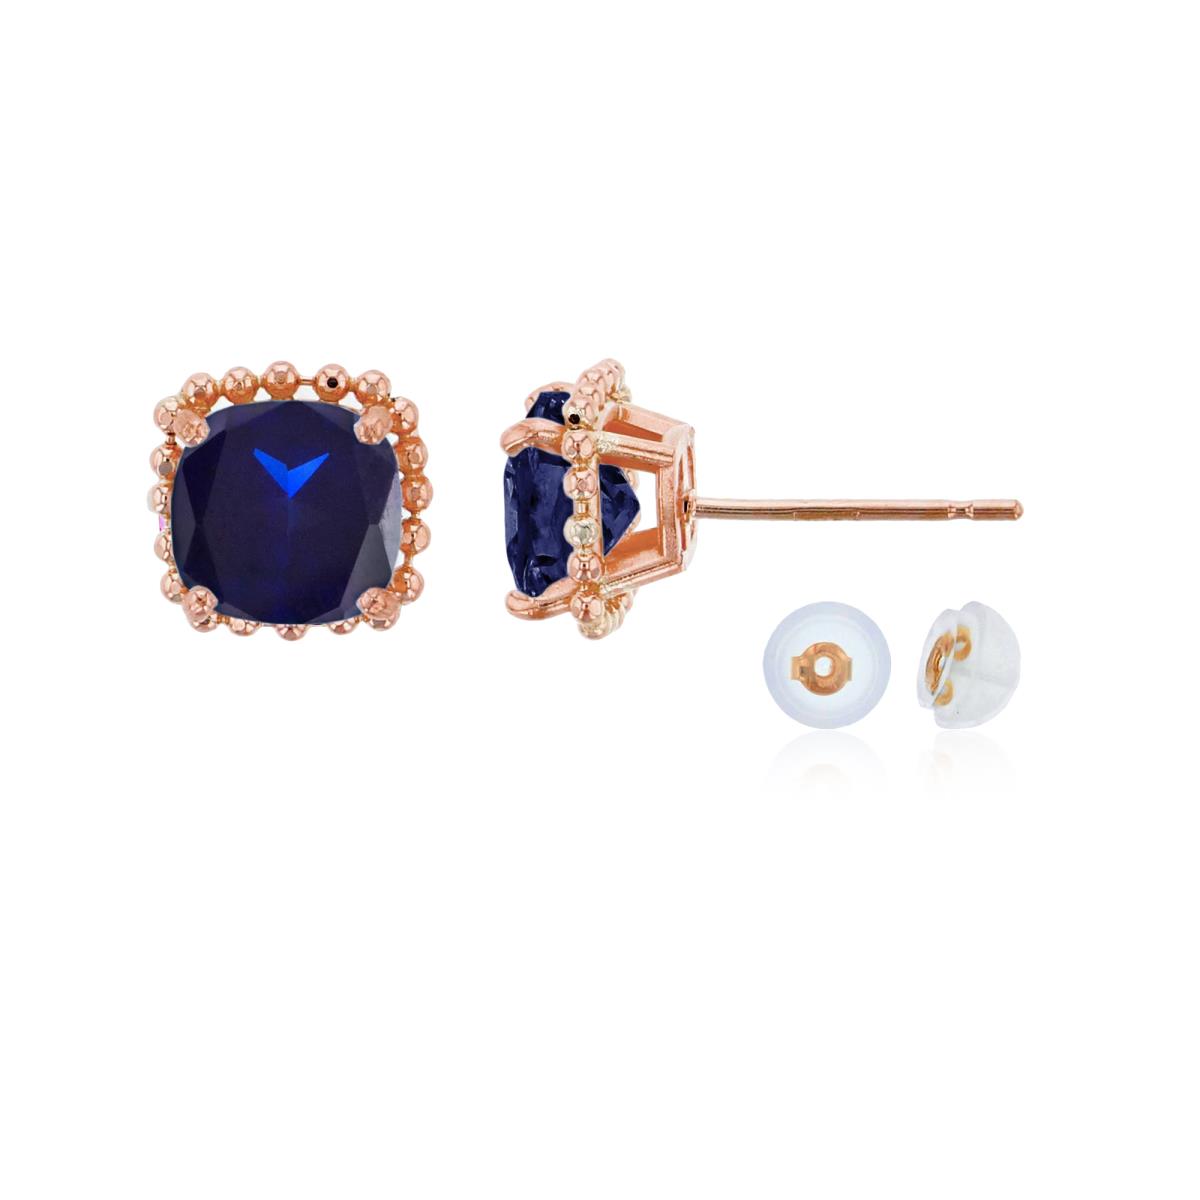 10K Rose Gold 6x6mm Cushion Cut Created Blue Sapphire Bead Frame Stud Earring with Silicone Back